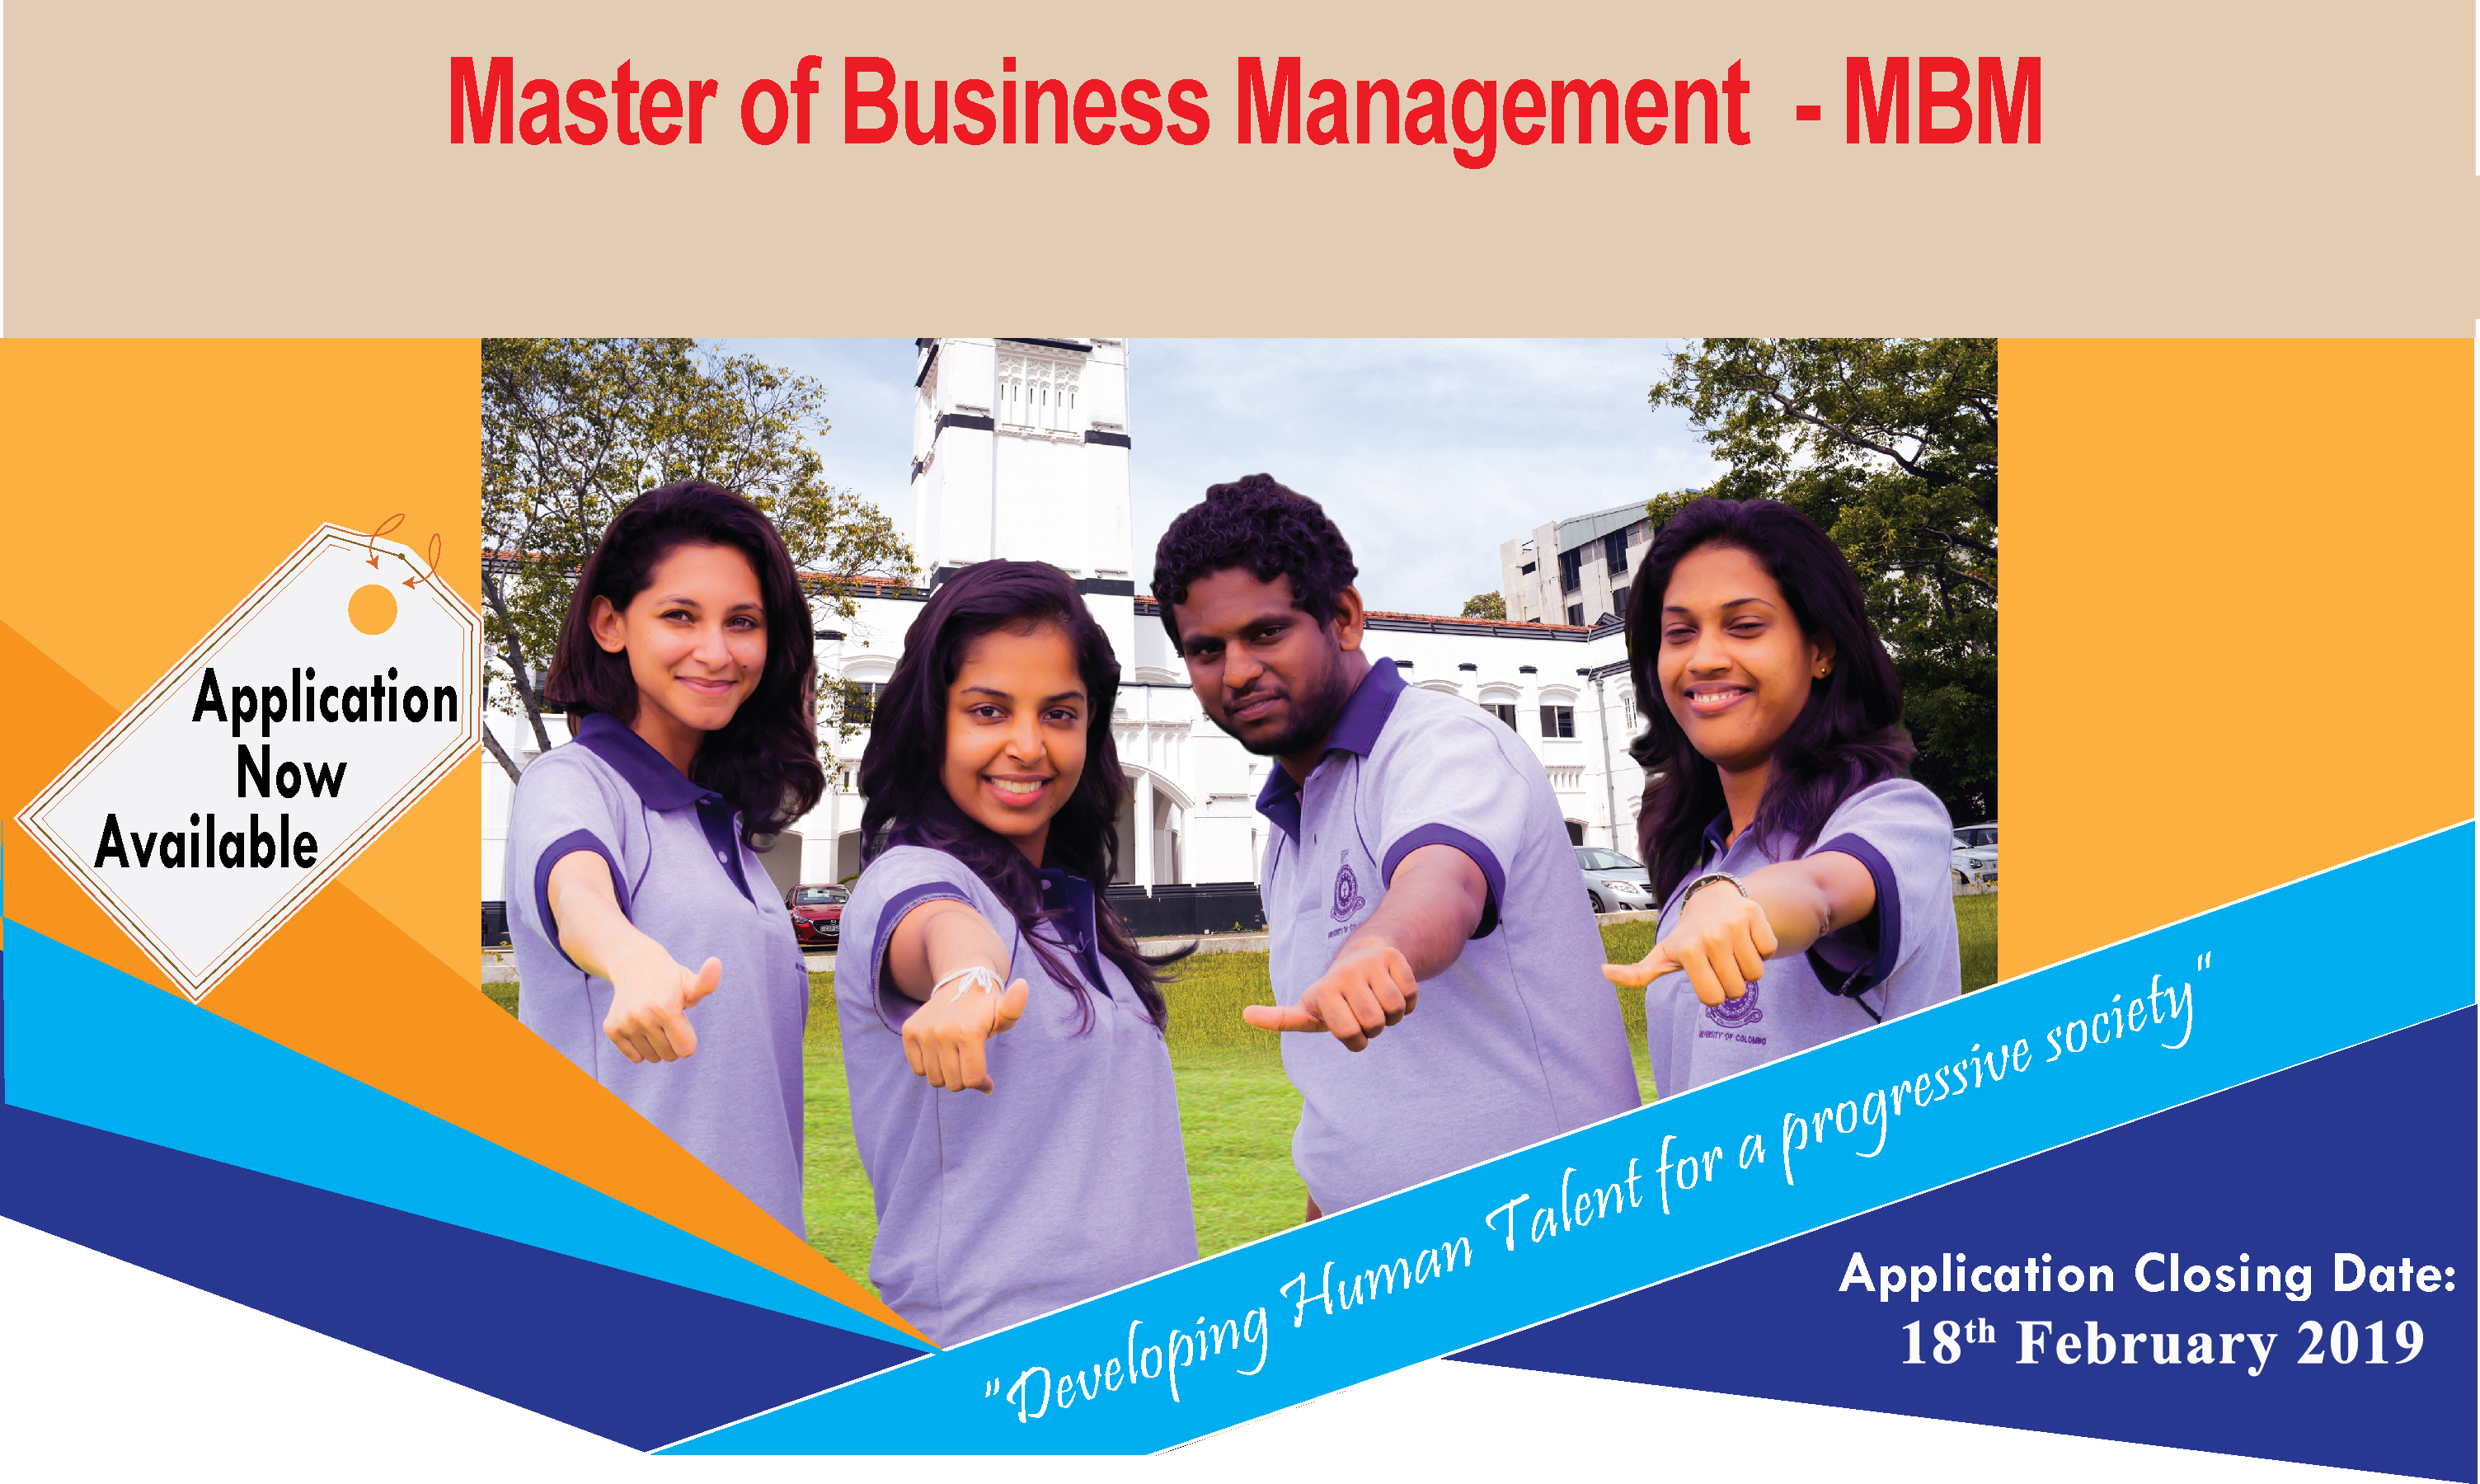 Master of Business Management